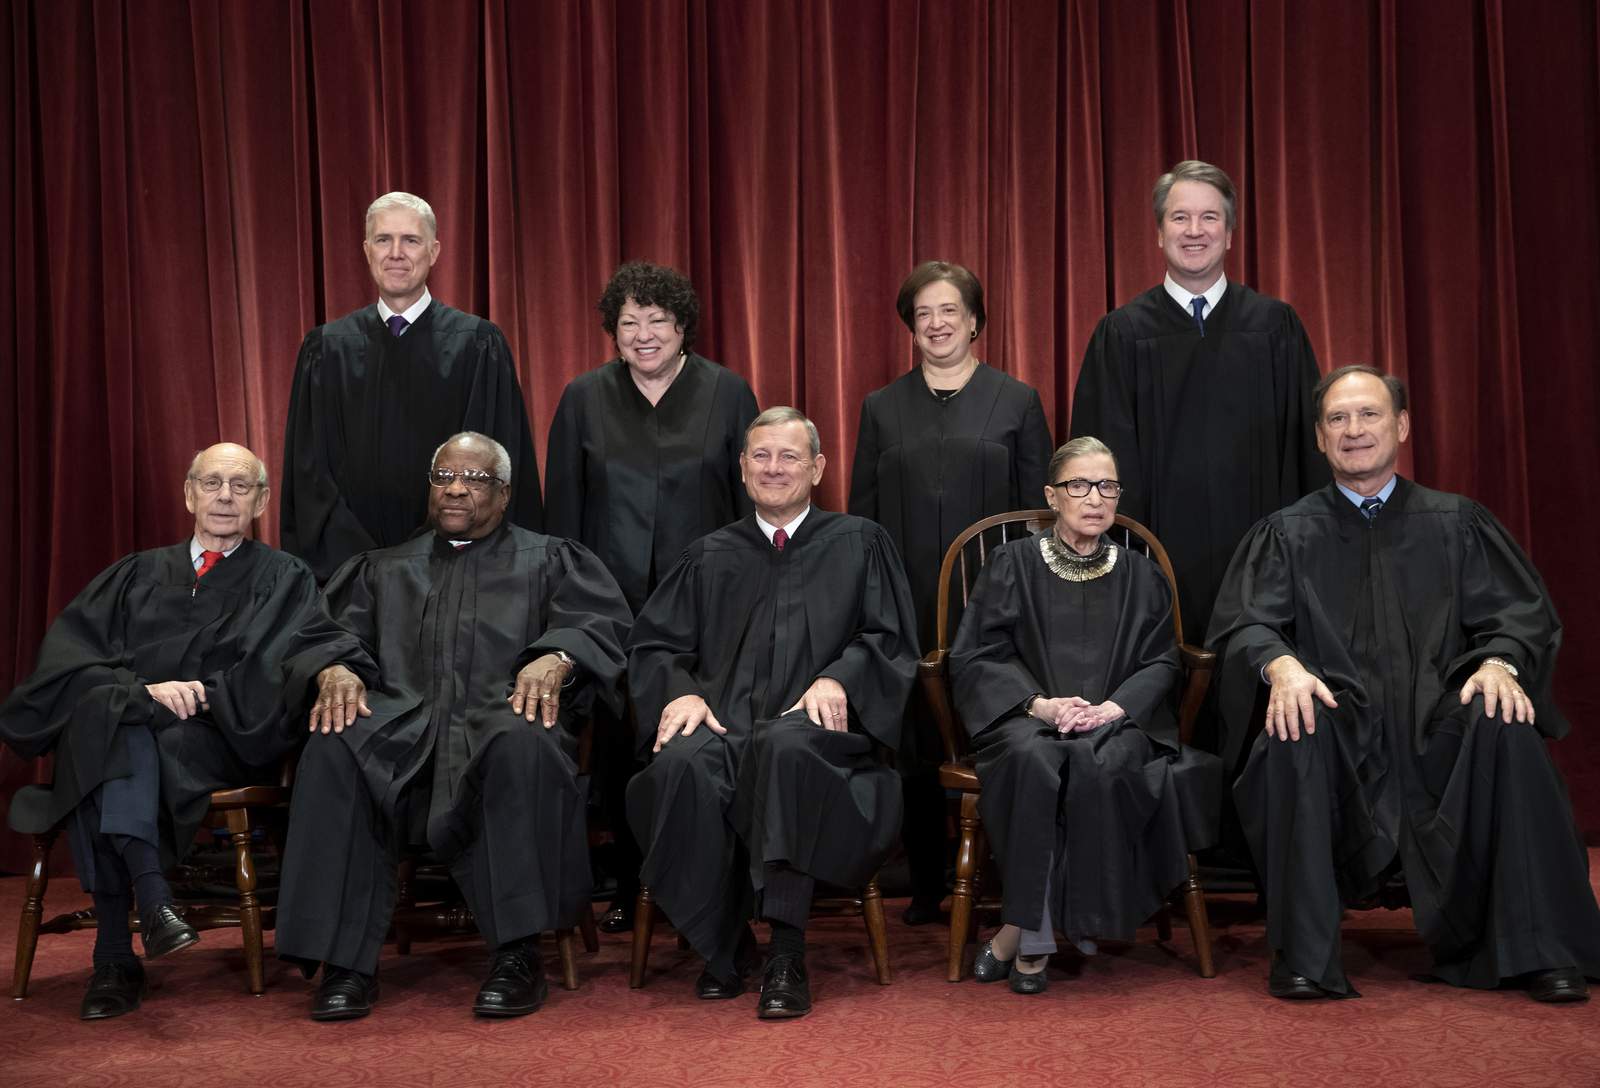 Pandemic means a silent June at the Supreme Court